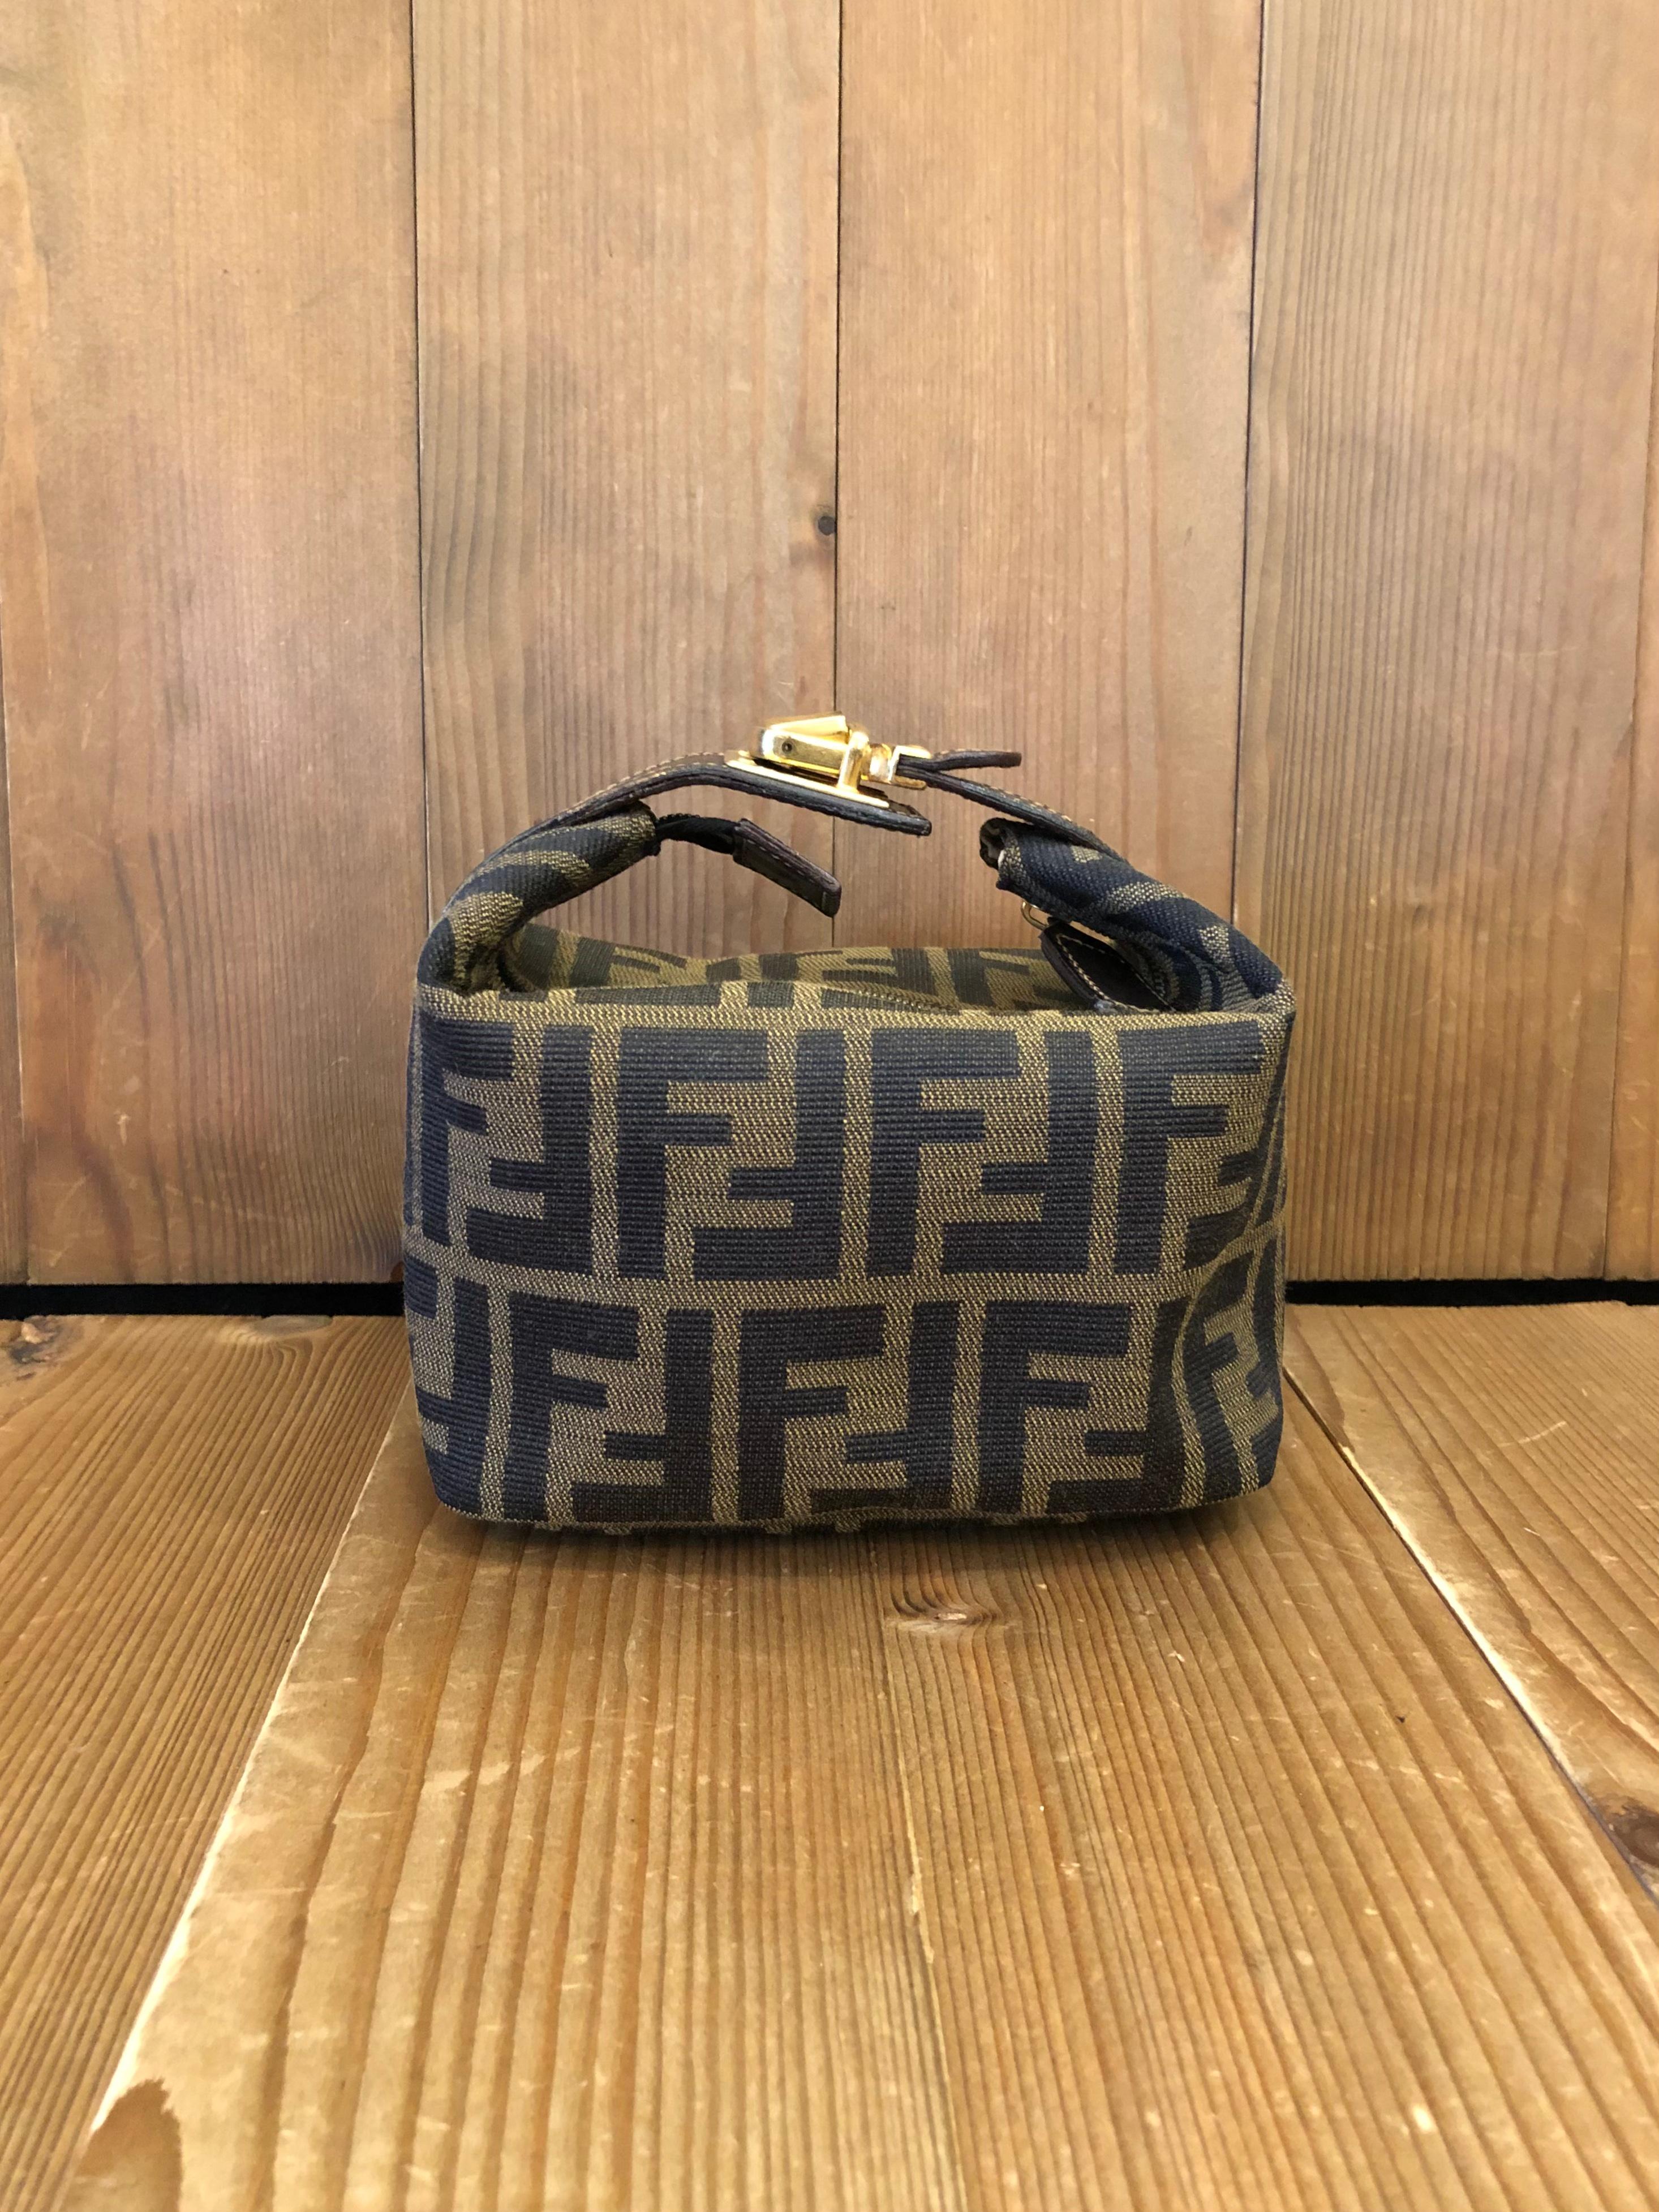 Vintage Fendi mini vanity pouch in Fendi's iconic Zucca jacquard featuring gold toned buckled handle. Made in Italy. Measures 6 x 5 x 3.75 inches (fits plus-sized iPhone)

Condition: Good vintage condition with minor signs of wear. Interior fully